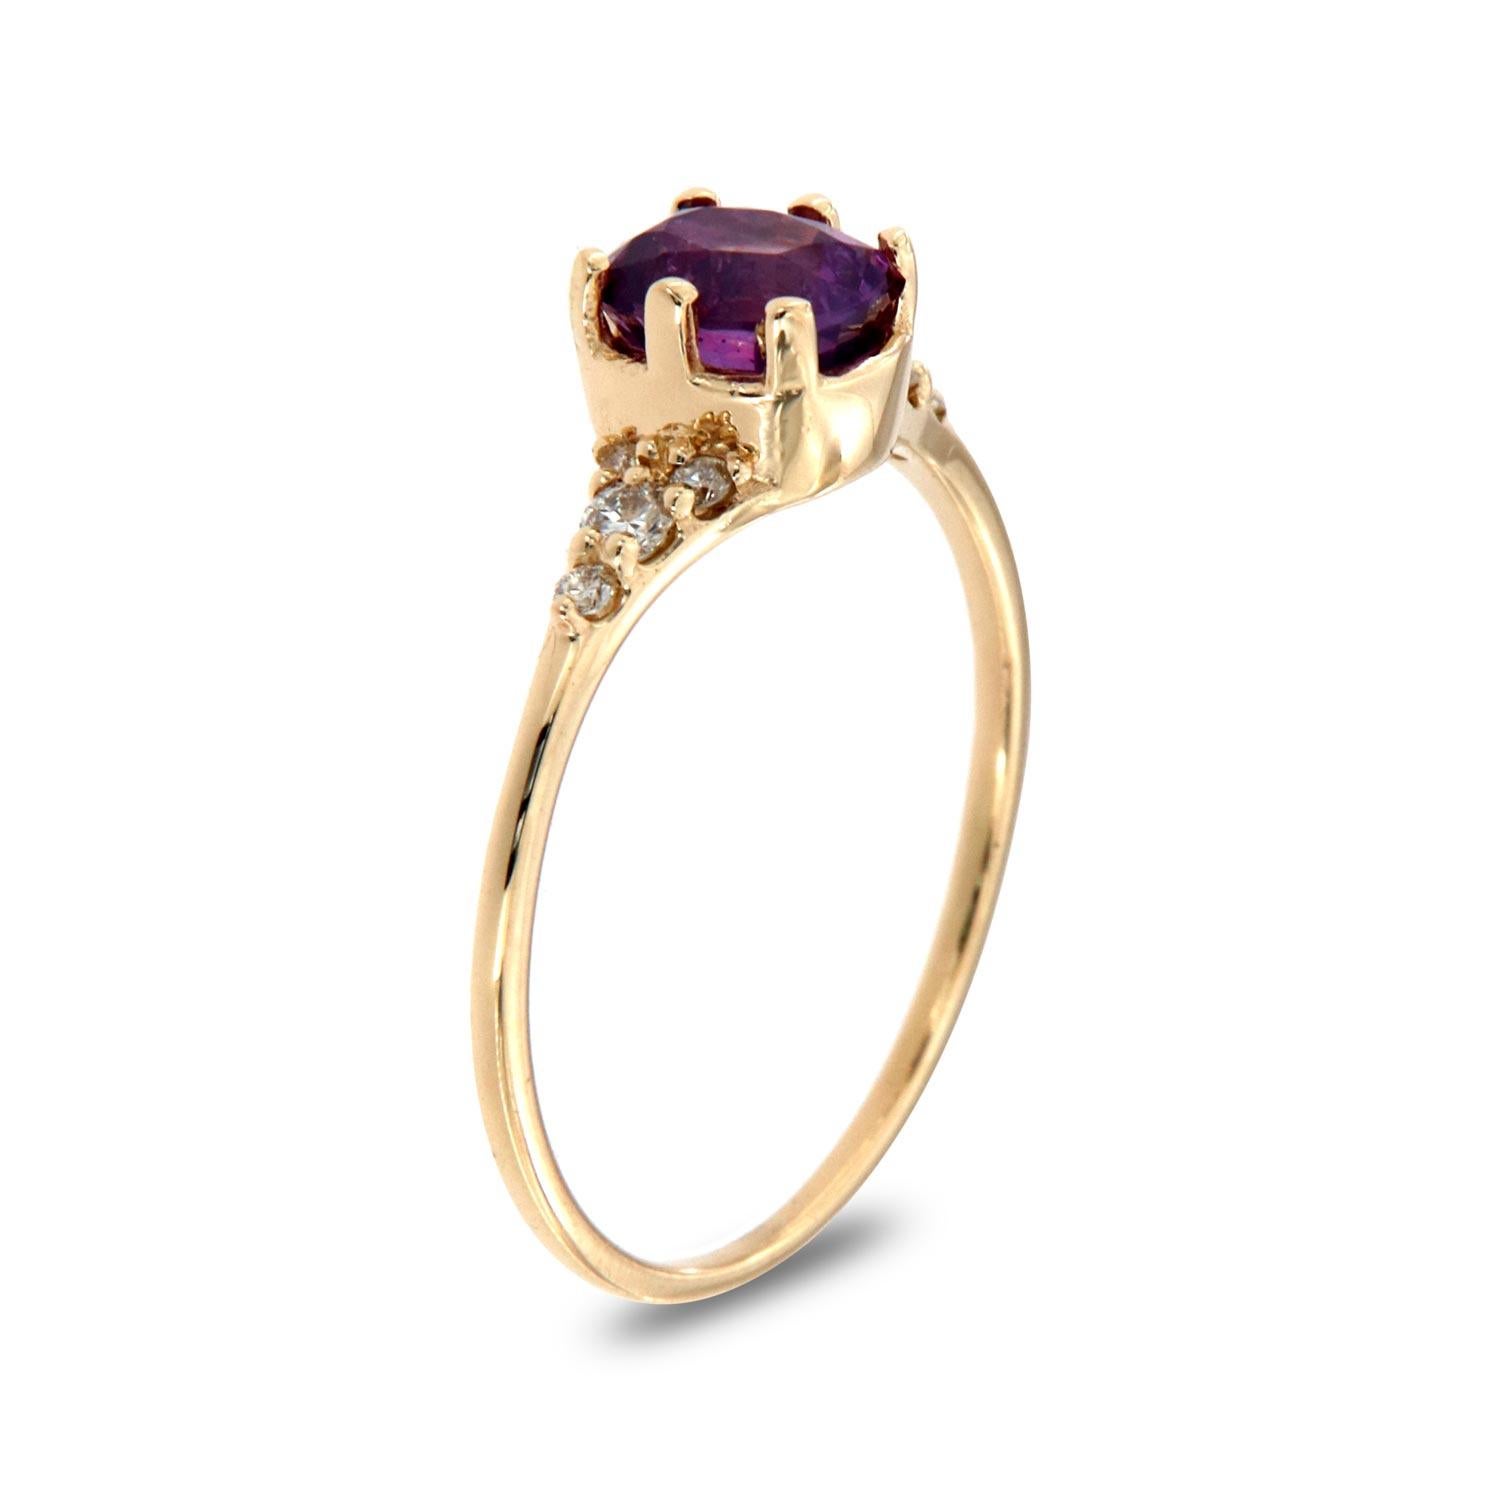 This petite rustic organic designed ring is impressive in its vintage appeal, featuring a natural purplis pink Elongated Cushion sapphire, accented with round brilliant diamonds. Experience the difference in person!

Product details: 

Center